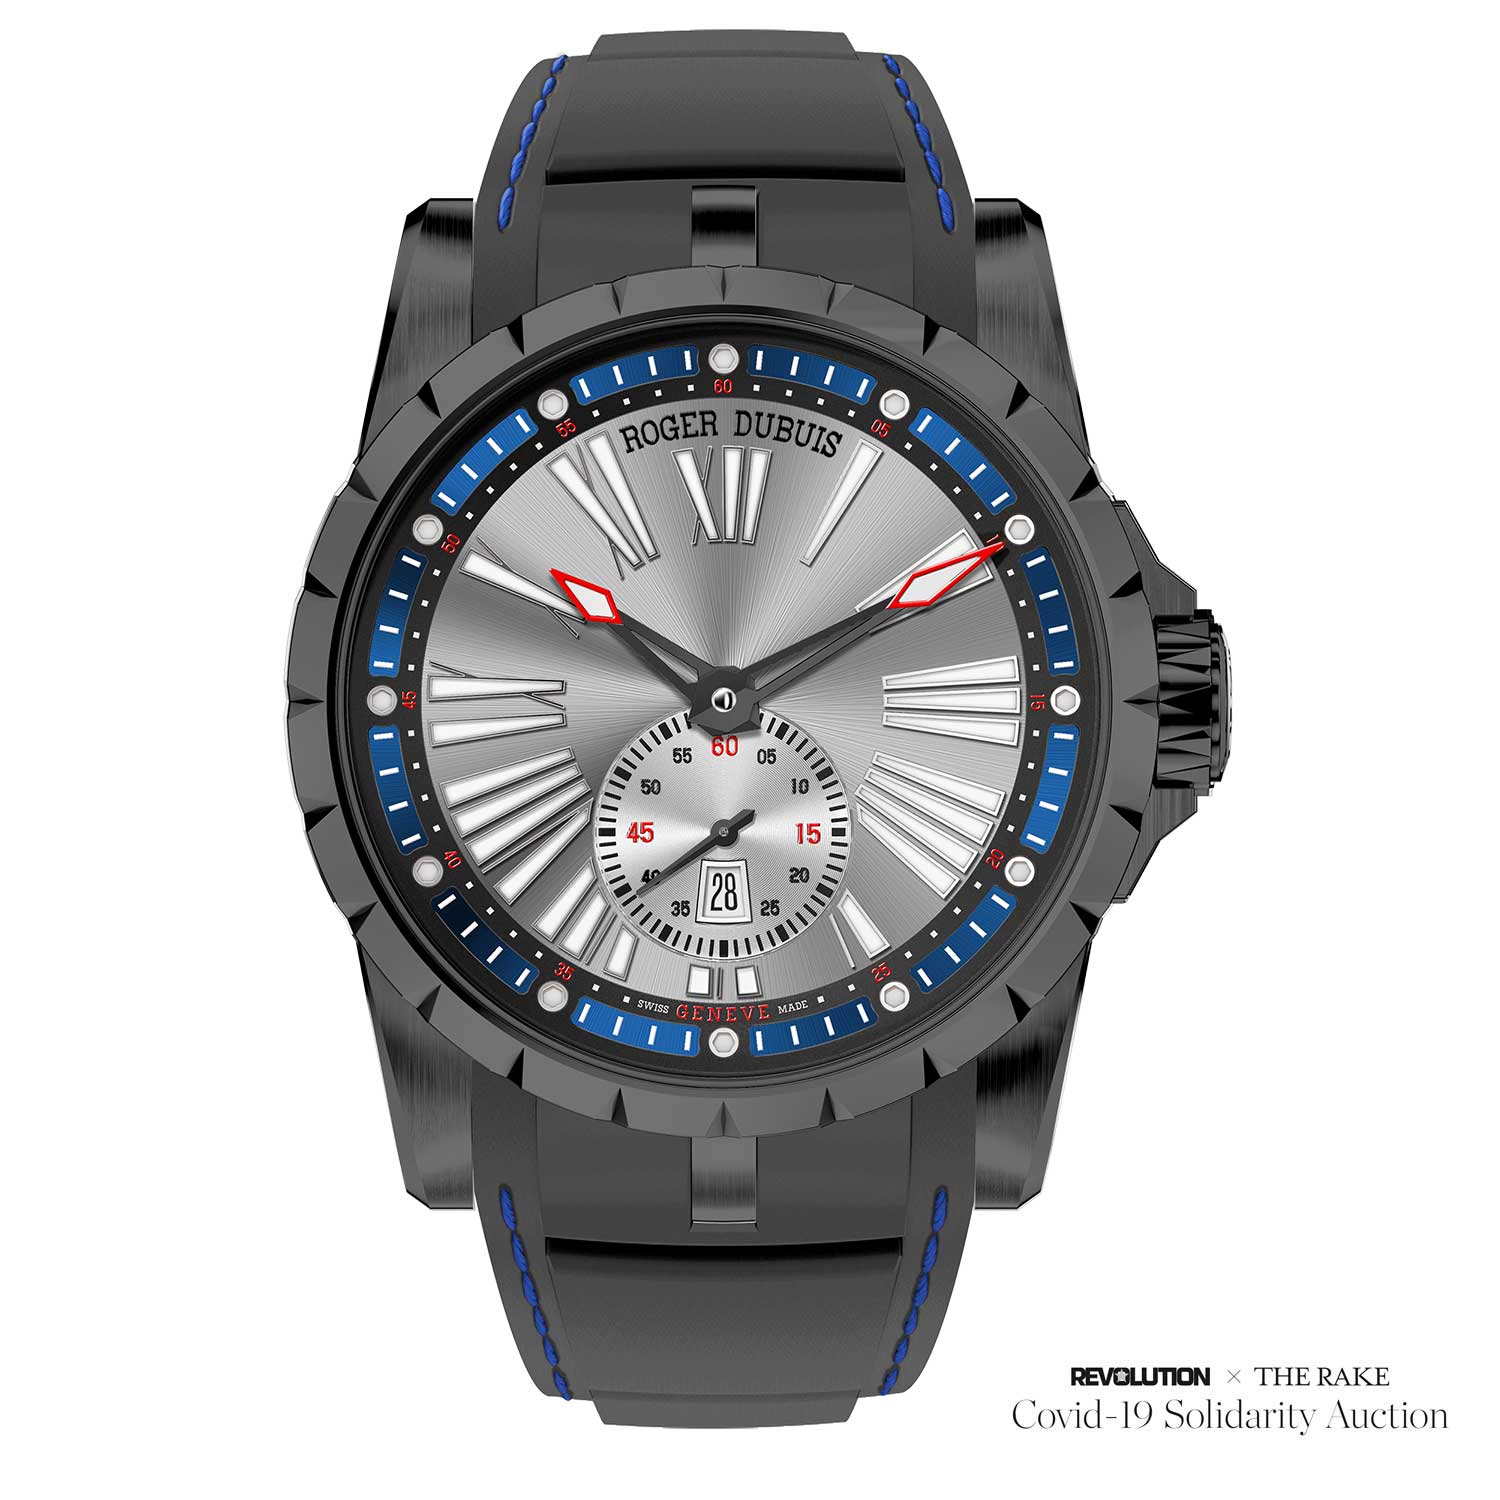 Roger Dubuis Excalibur Essential Blue, pièce unique created for Revolution x The Rake Covid-19 Solidarity Auction